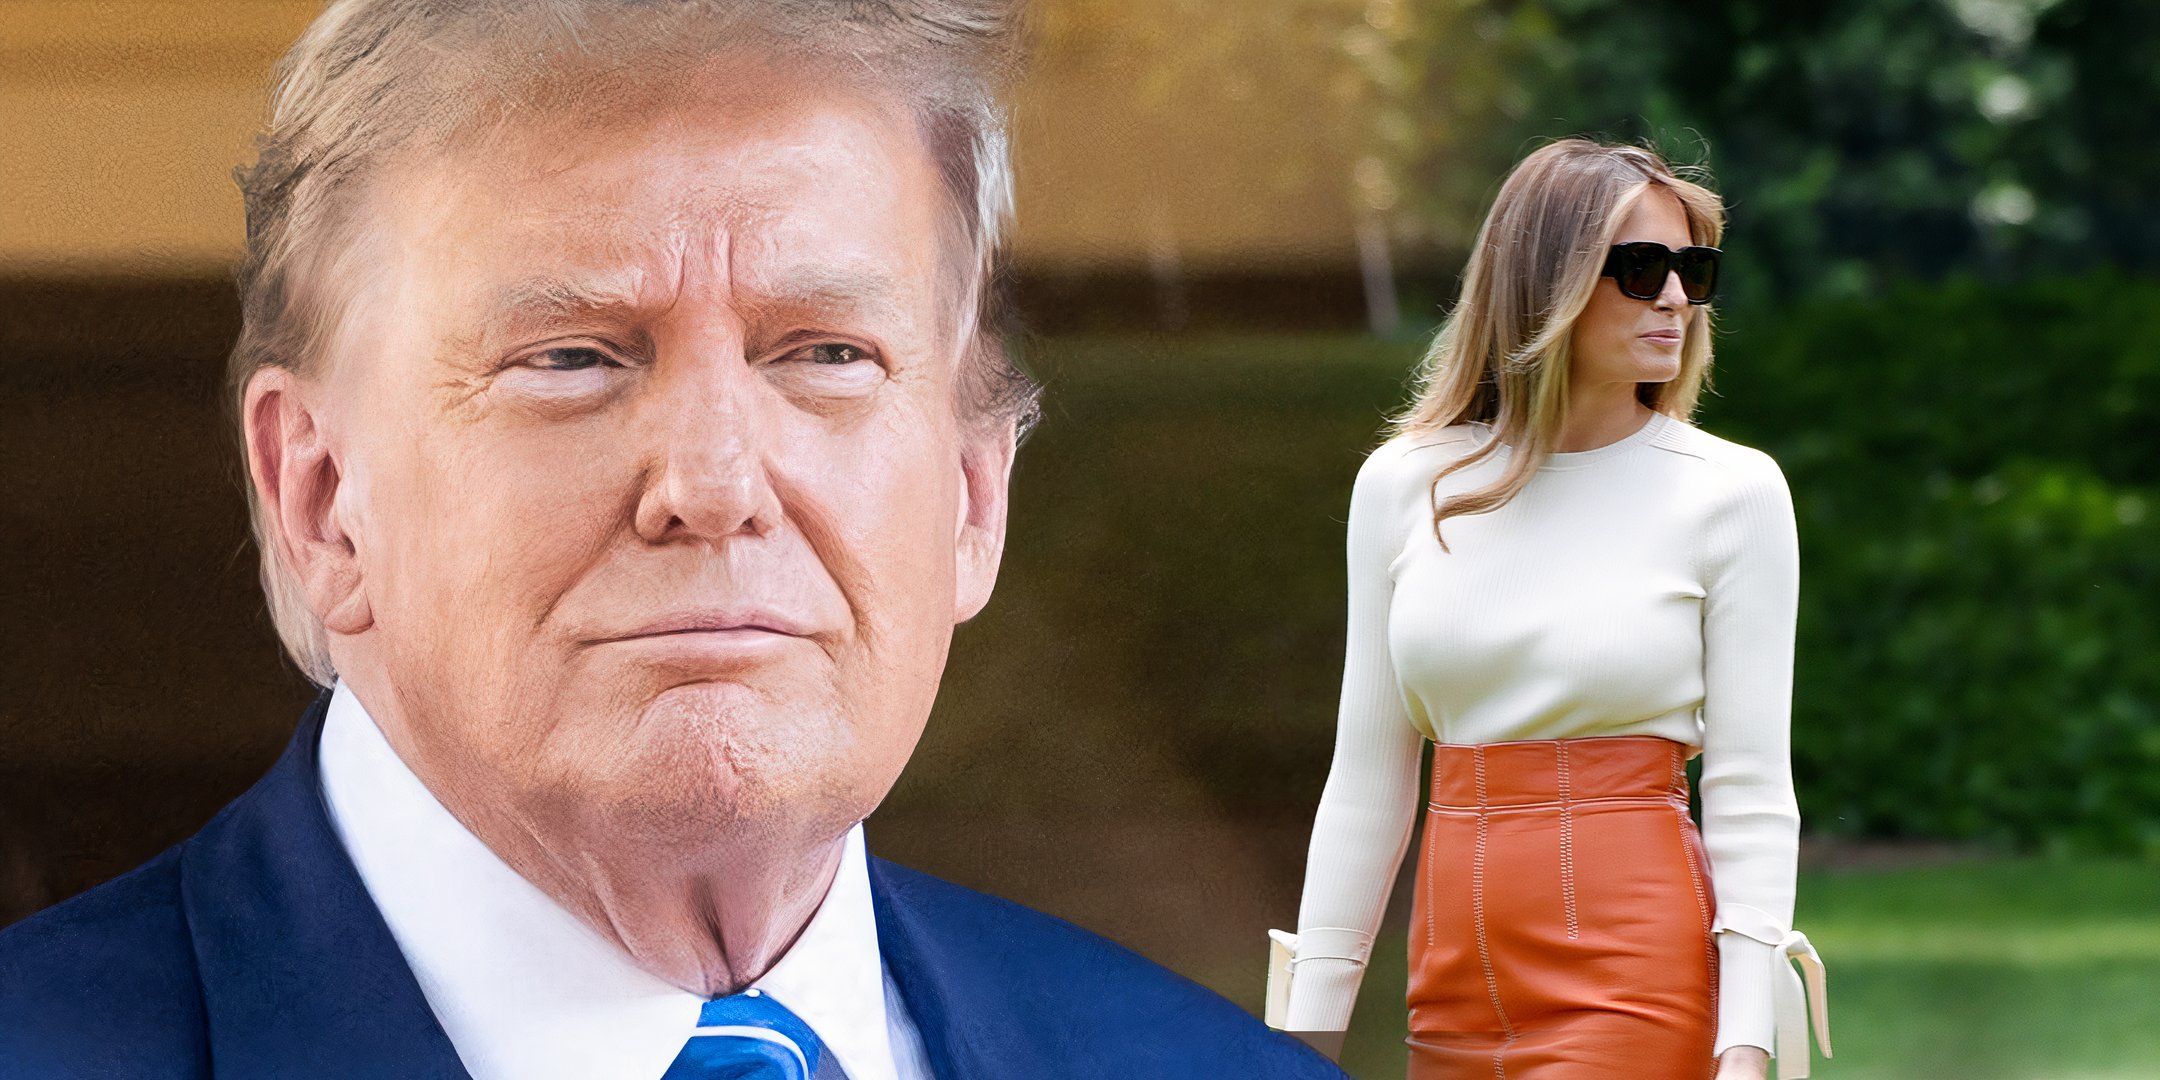 Melania Trump's Former Staffer Alleges This About Her Relationship With Donald